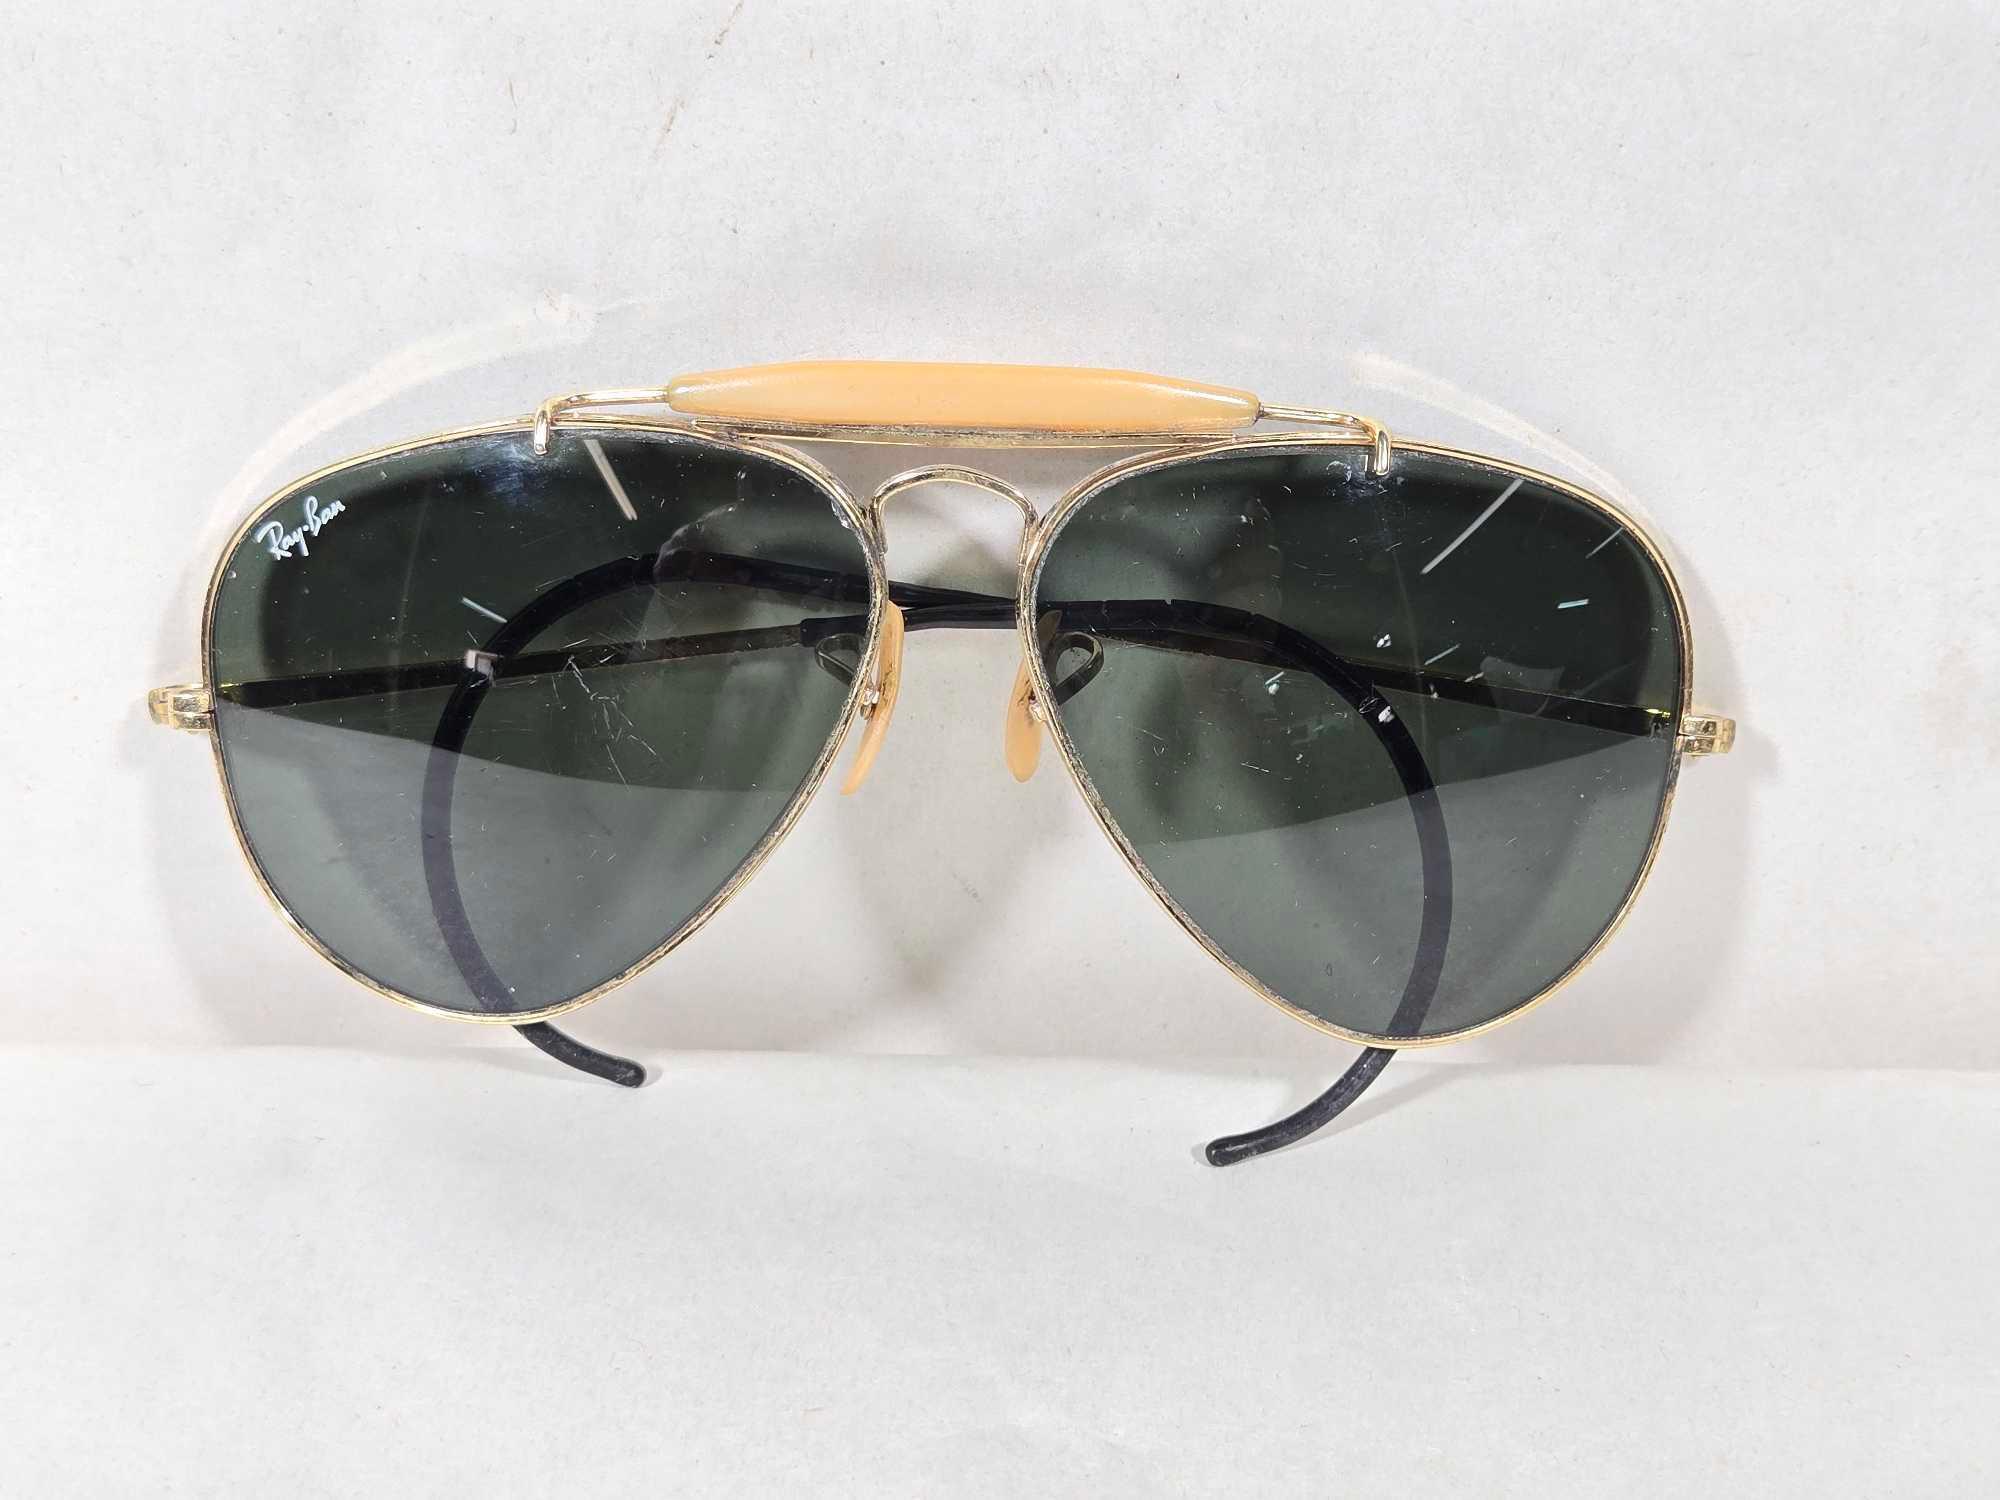 4 Pair of Pre-Owned Ray-Ban Sunglasses